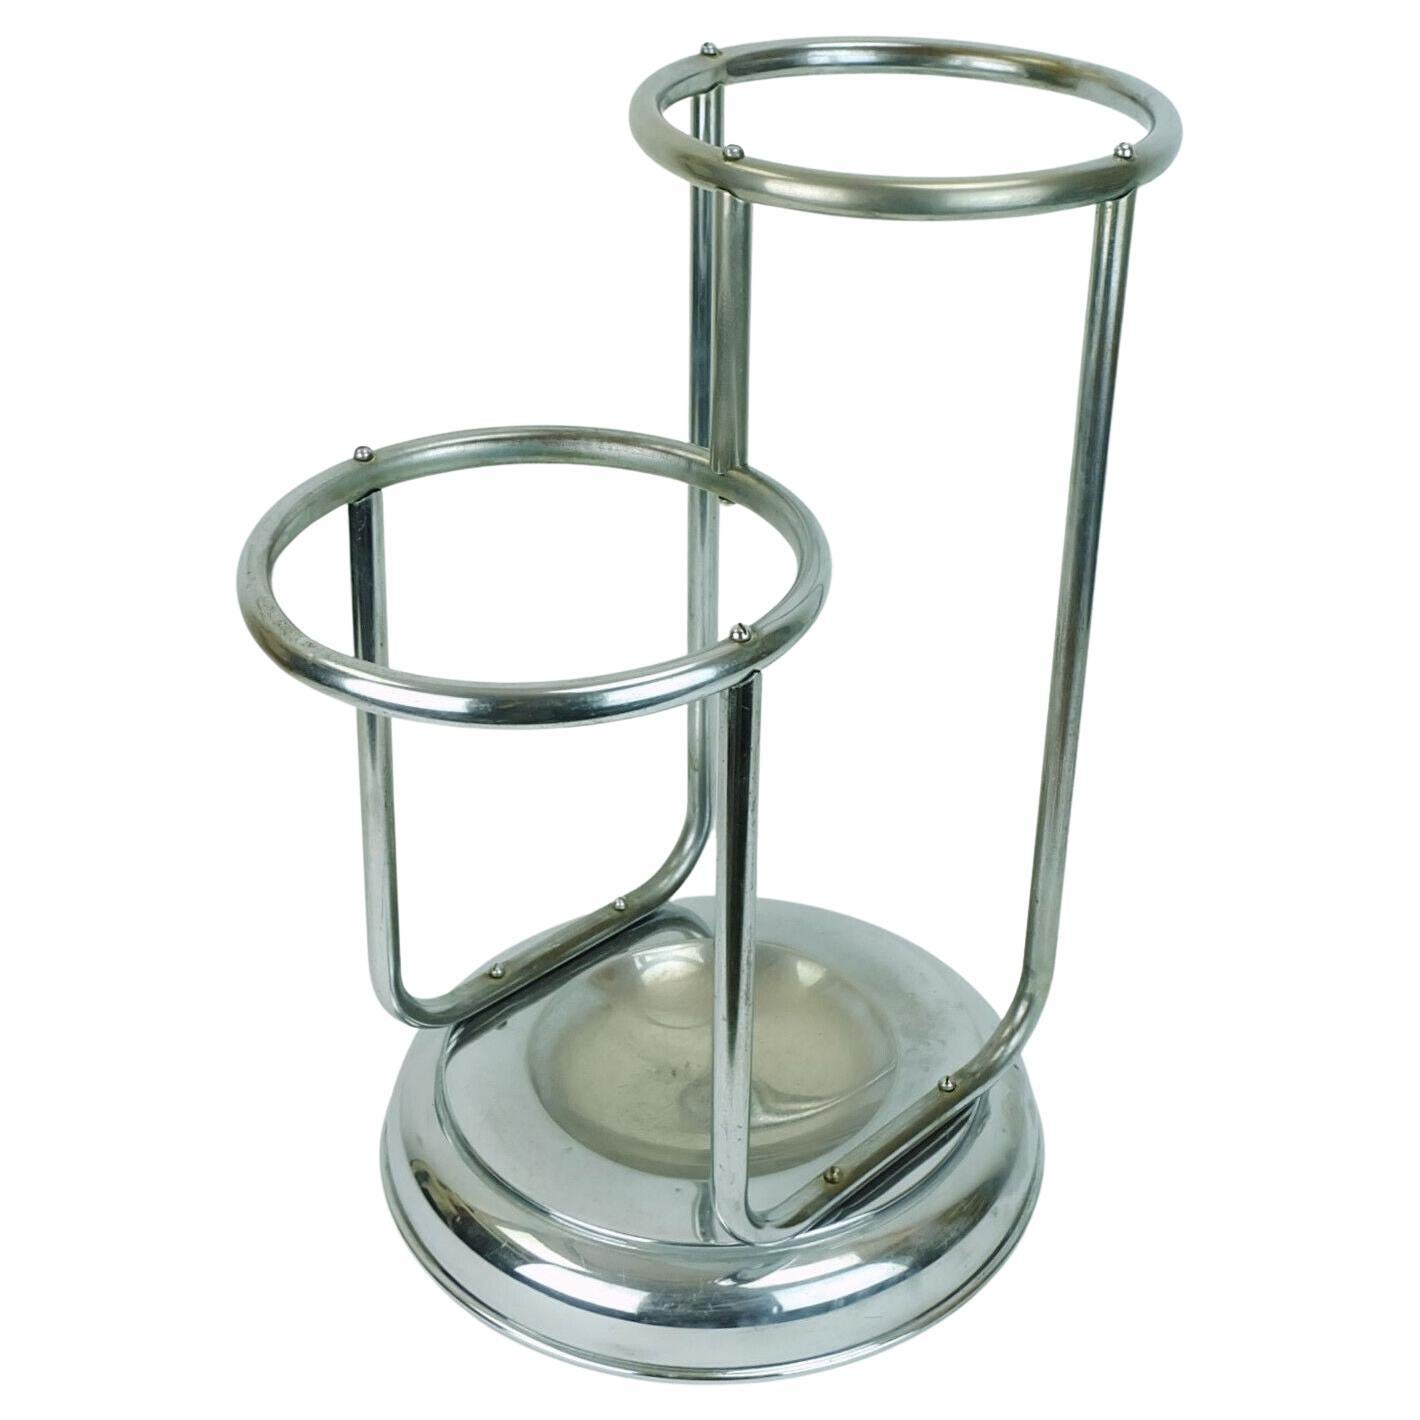 1930s art deco UMBRELLA STAND chrome plated metal For Sale